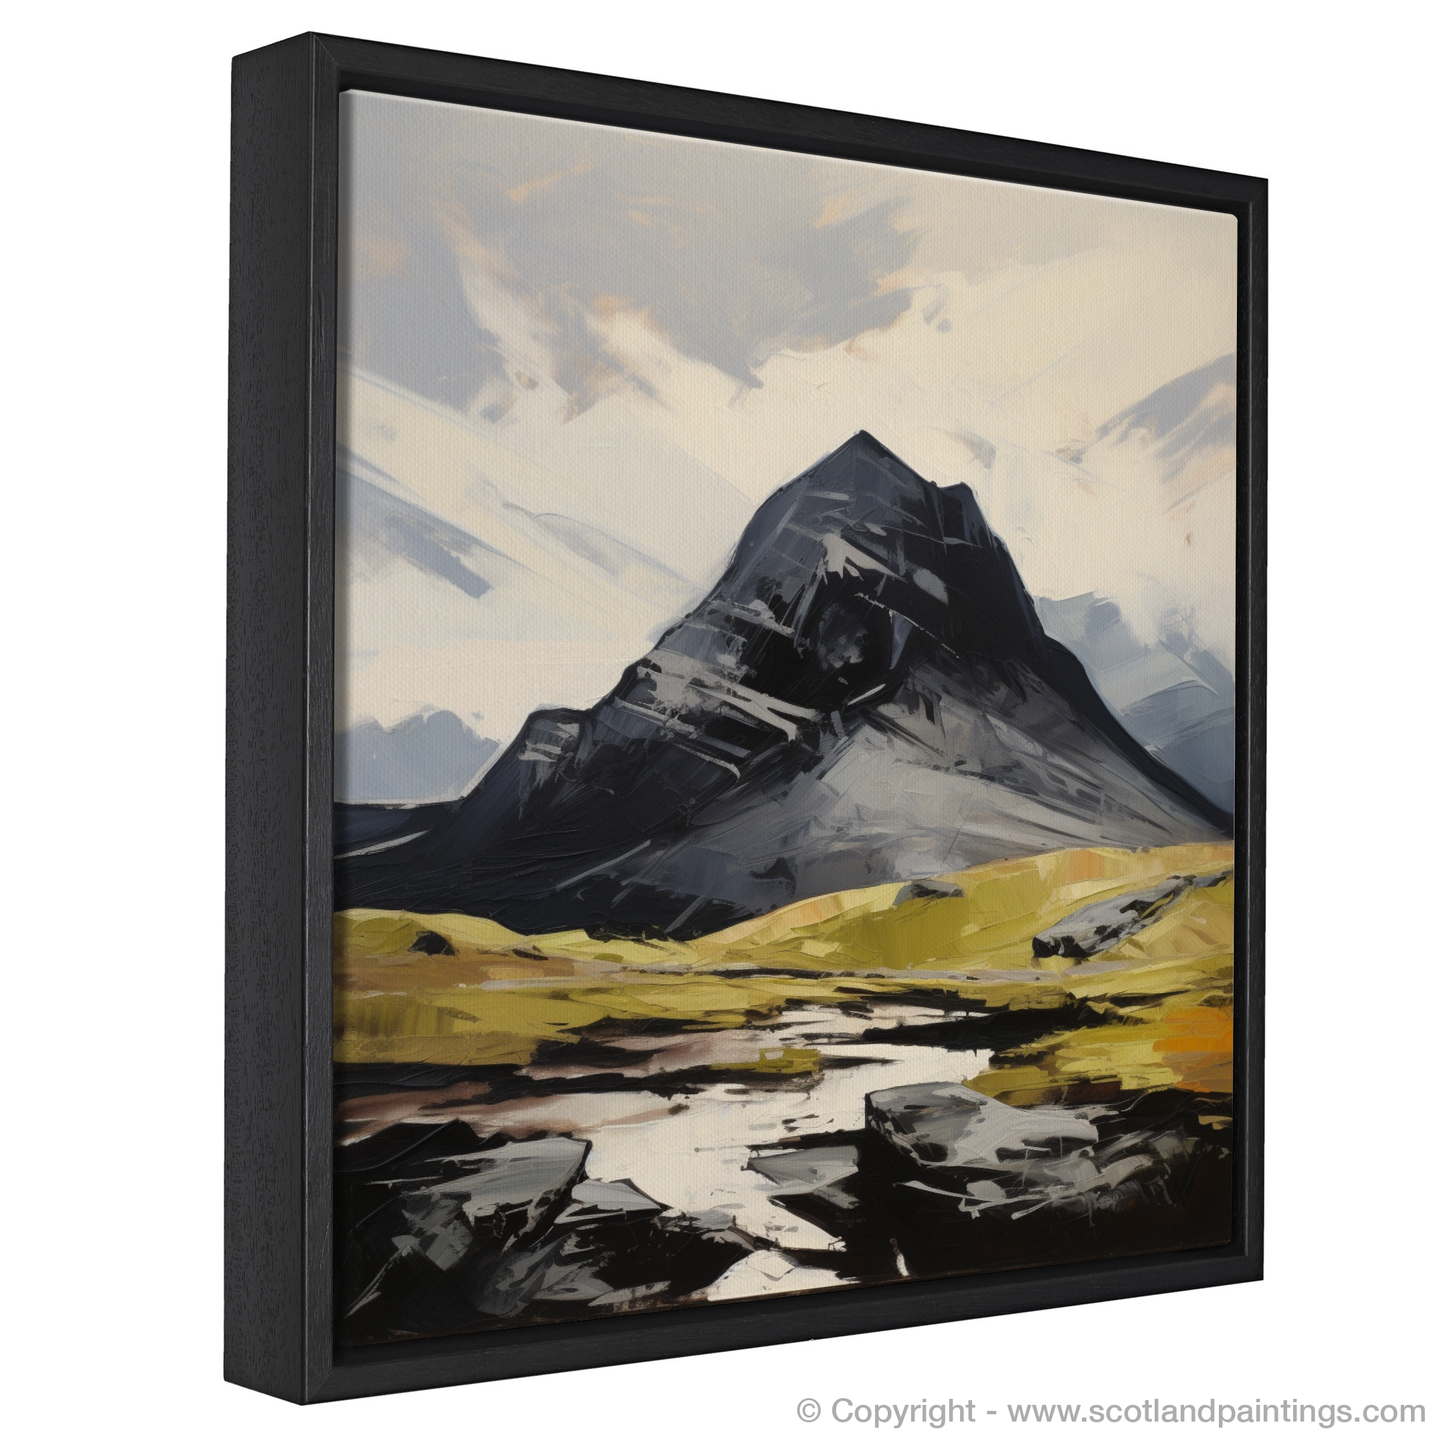 Painting and Art Print of Ben More Assynt, Sutherland entitled "Expressionist Majesty of Ben More Assynt".